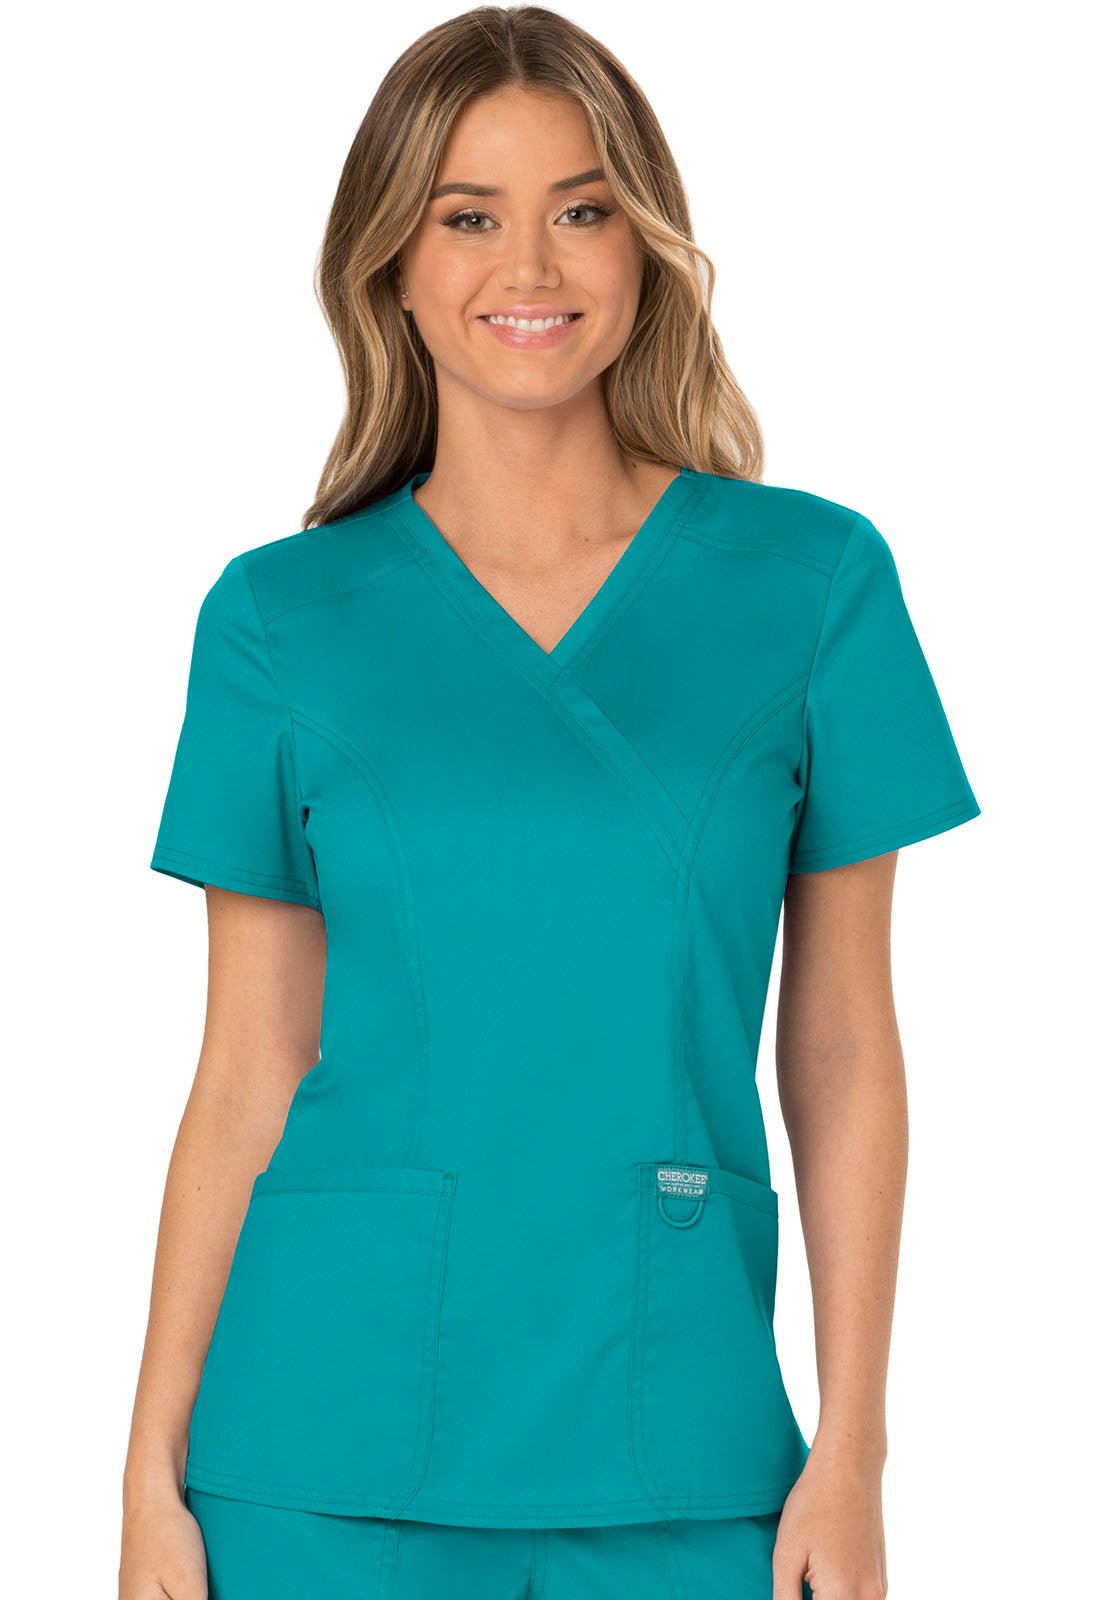 Teal Blue Revolution Mock Wrap Top - Front View